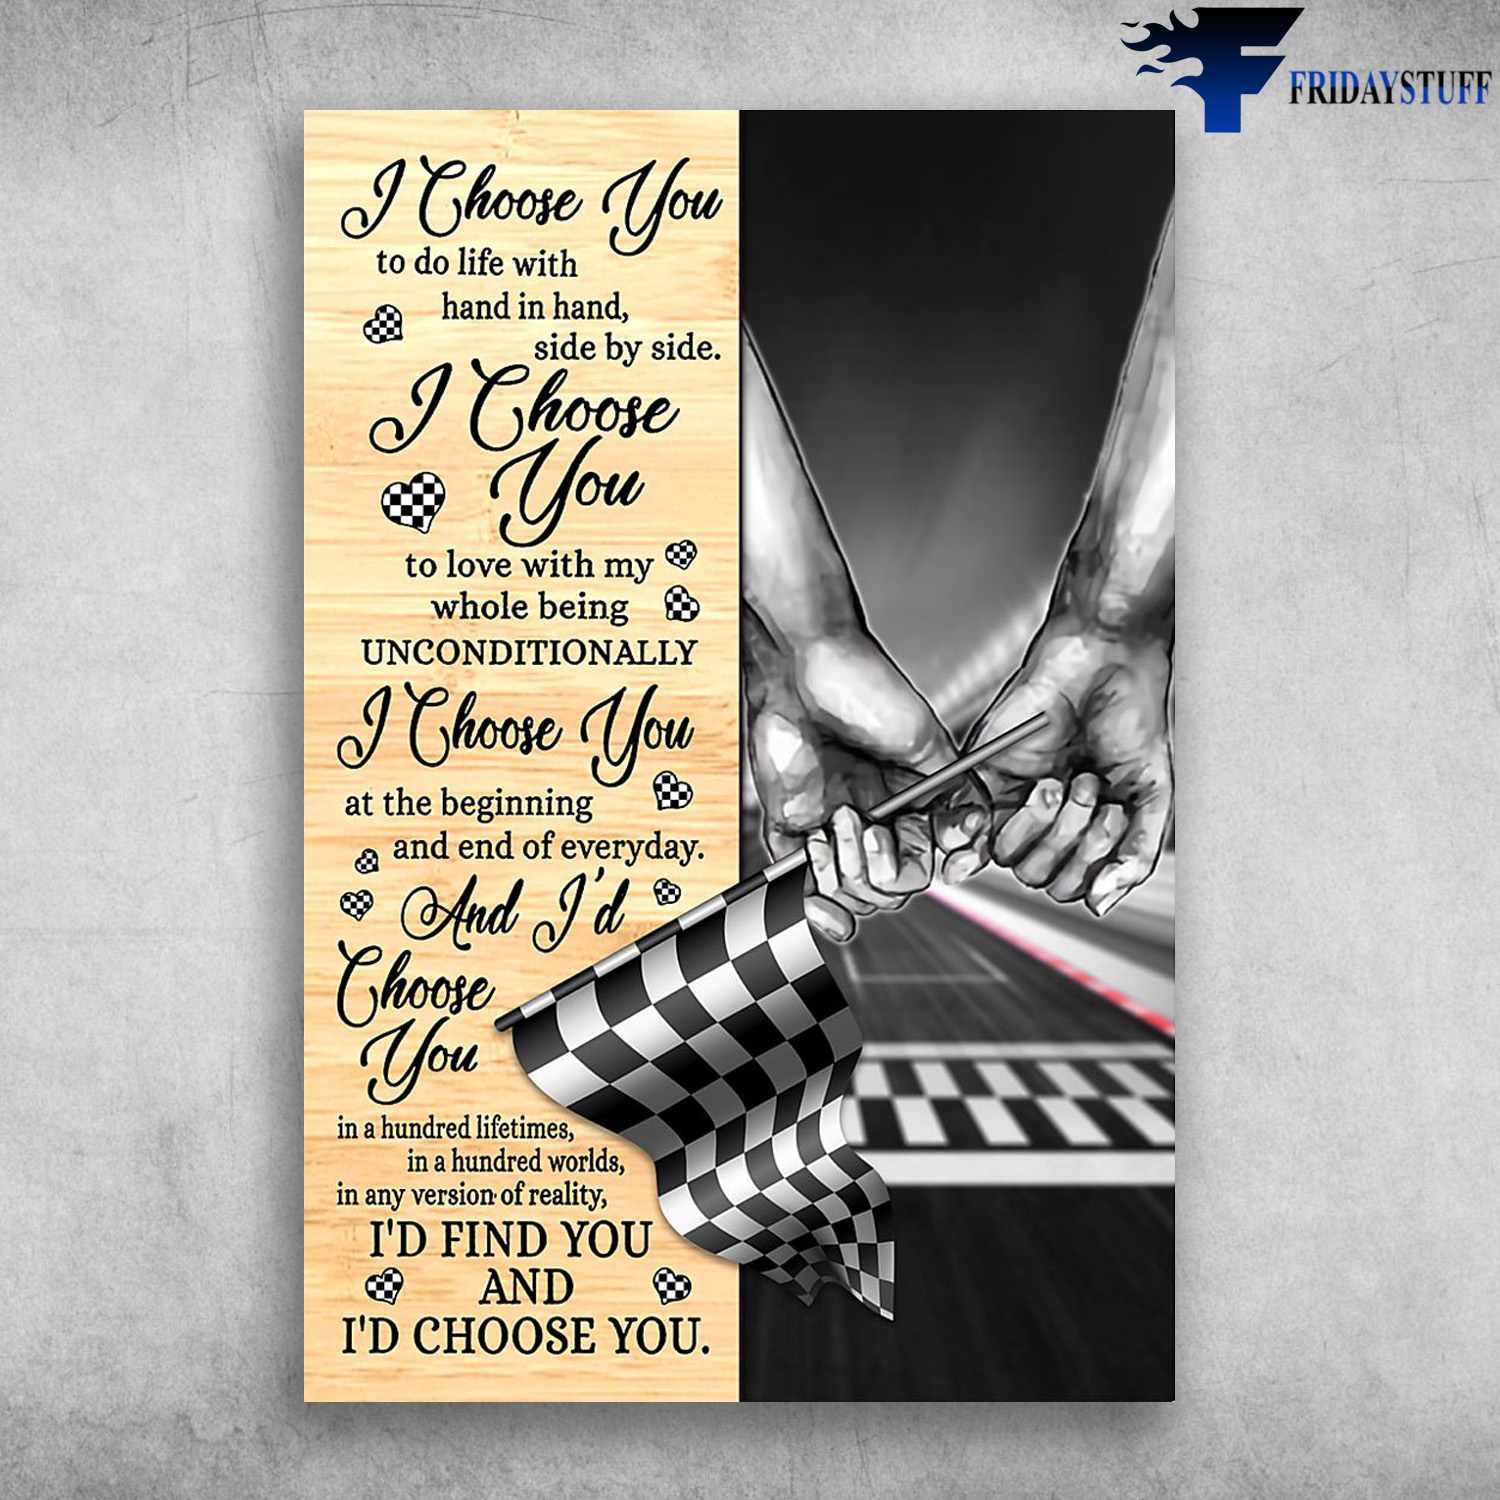 Racing Couple - I Choose You, To Do Life With Hand In Hand, Side By Side, I Choose You To Love With My Whole Being Unconditionally, I Choose You, At The Beginning And End Of Everyday, And I’d Choose You In A Hundred Lifetimes